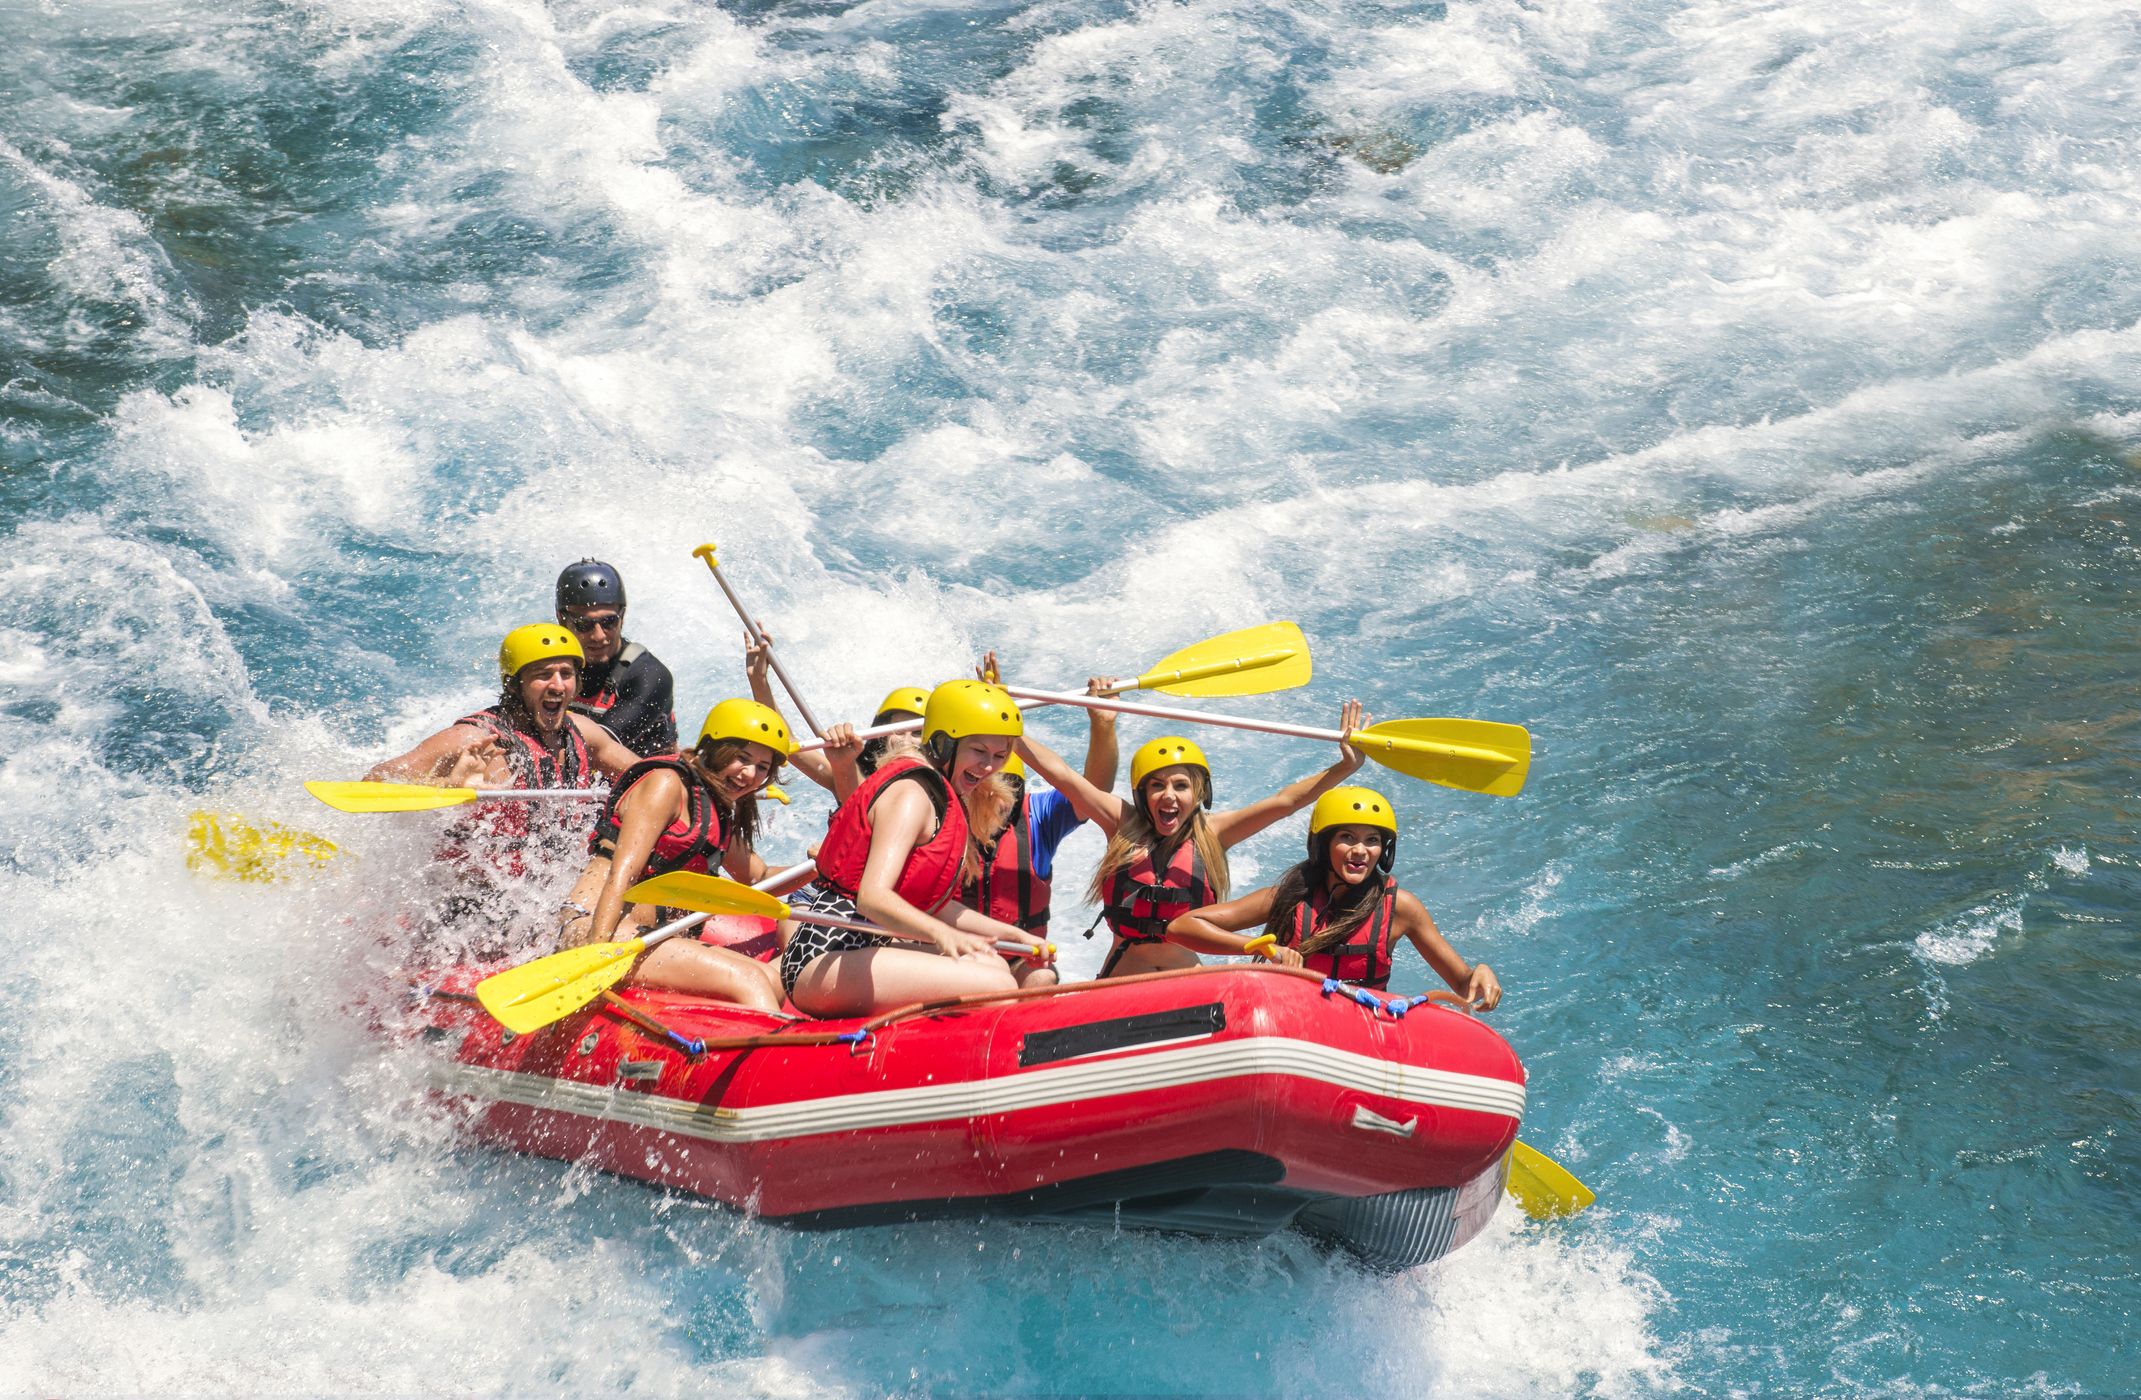 <p>Whitewater rafting is one of the most thrilling river water sports, and if you like to plan your entire vacation around opportunities to get out on the rapids, you are certainly not alone. People all over the world are drawn to the excitement of navigating the fast, shallow stretches of water by raft with a group of their friends in tow, and they flock to destinations known for their exciting courses. A number of these must-visit whitewater rafting spots are located right within the United States, in regions along the East Coast, West Coast, and everywhere in between. If you've been considering planning a whitewater rafting trip, you are definitely going to want to visit these locations, break out your paddles, and get in the water.</p>